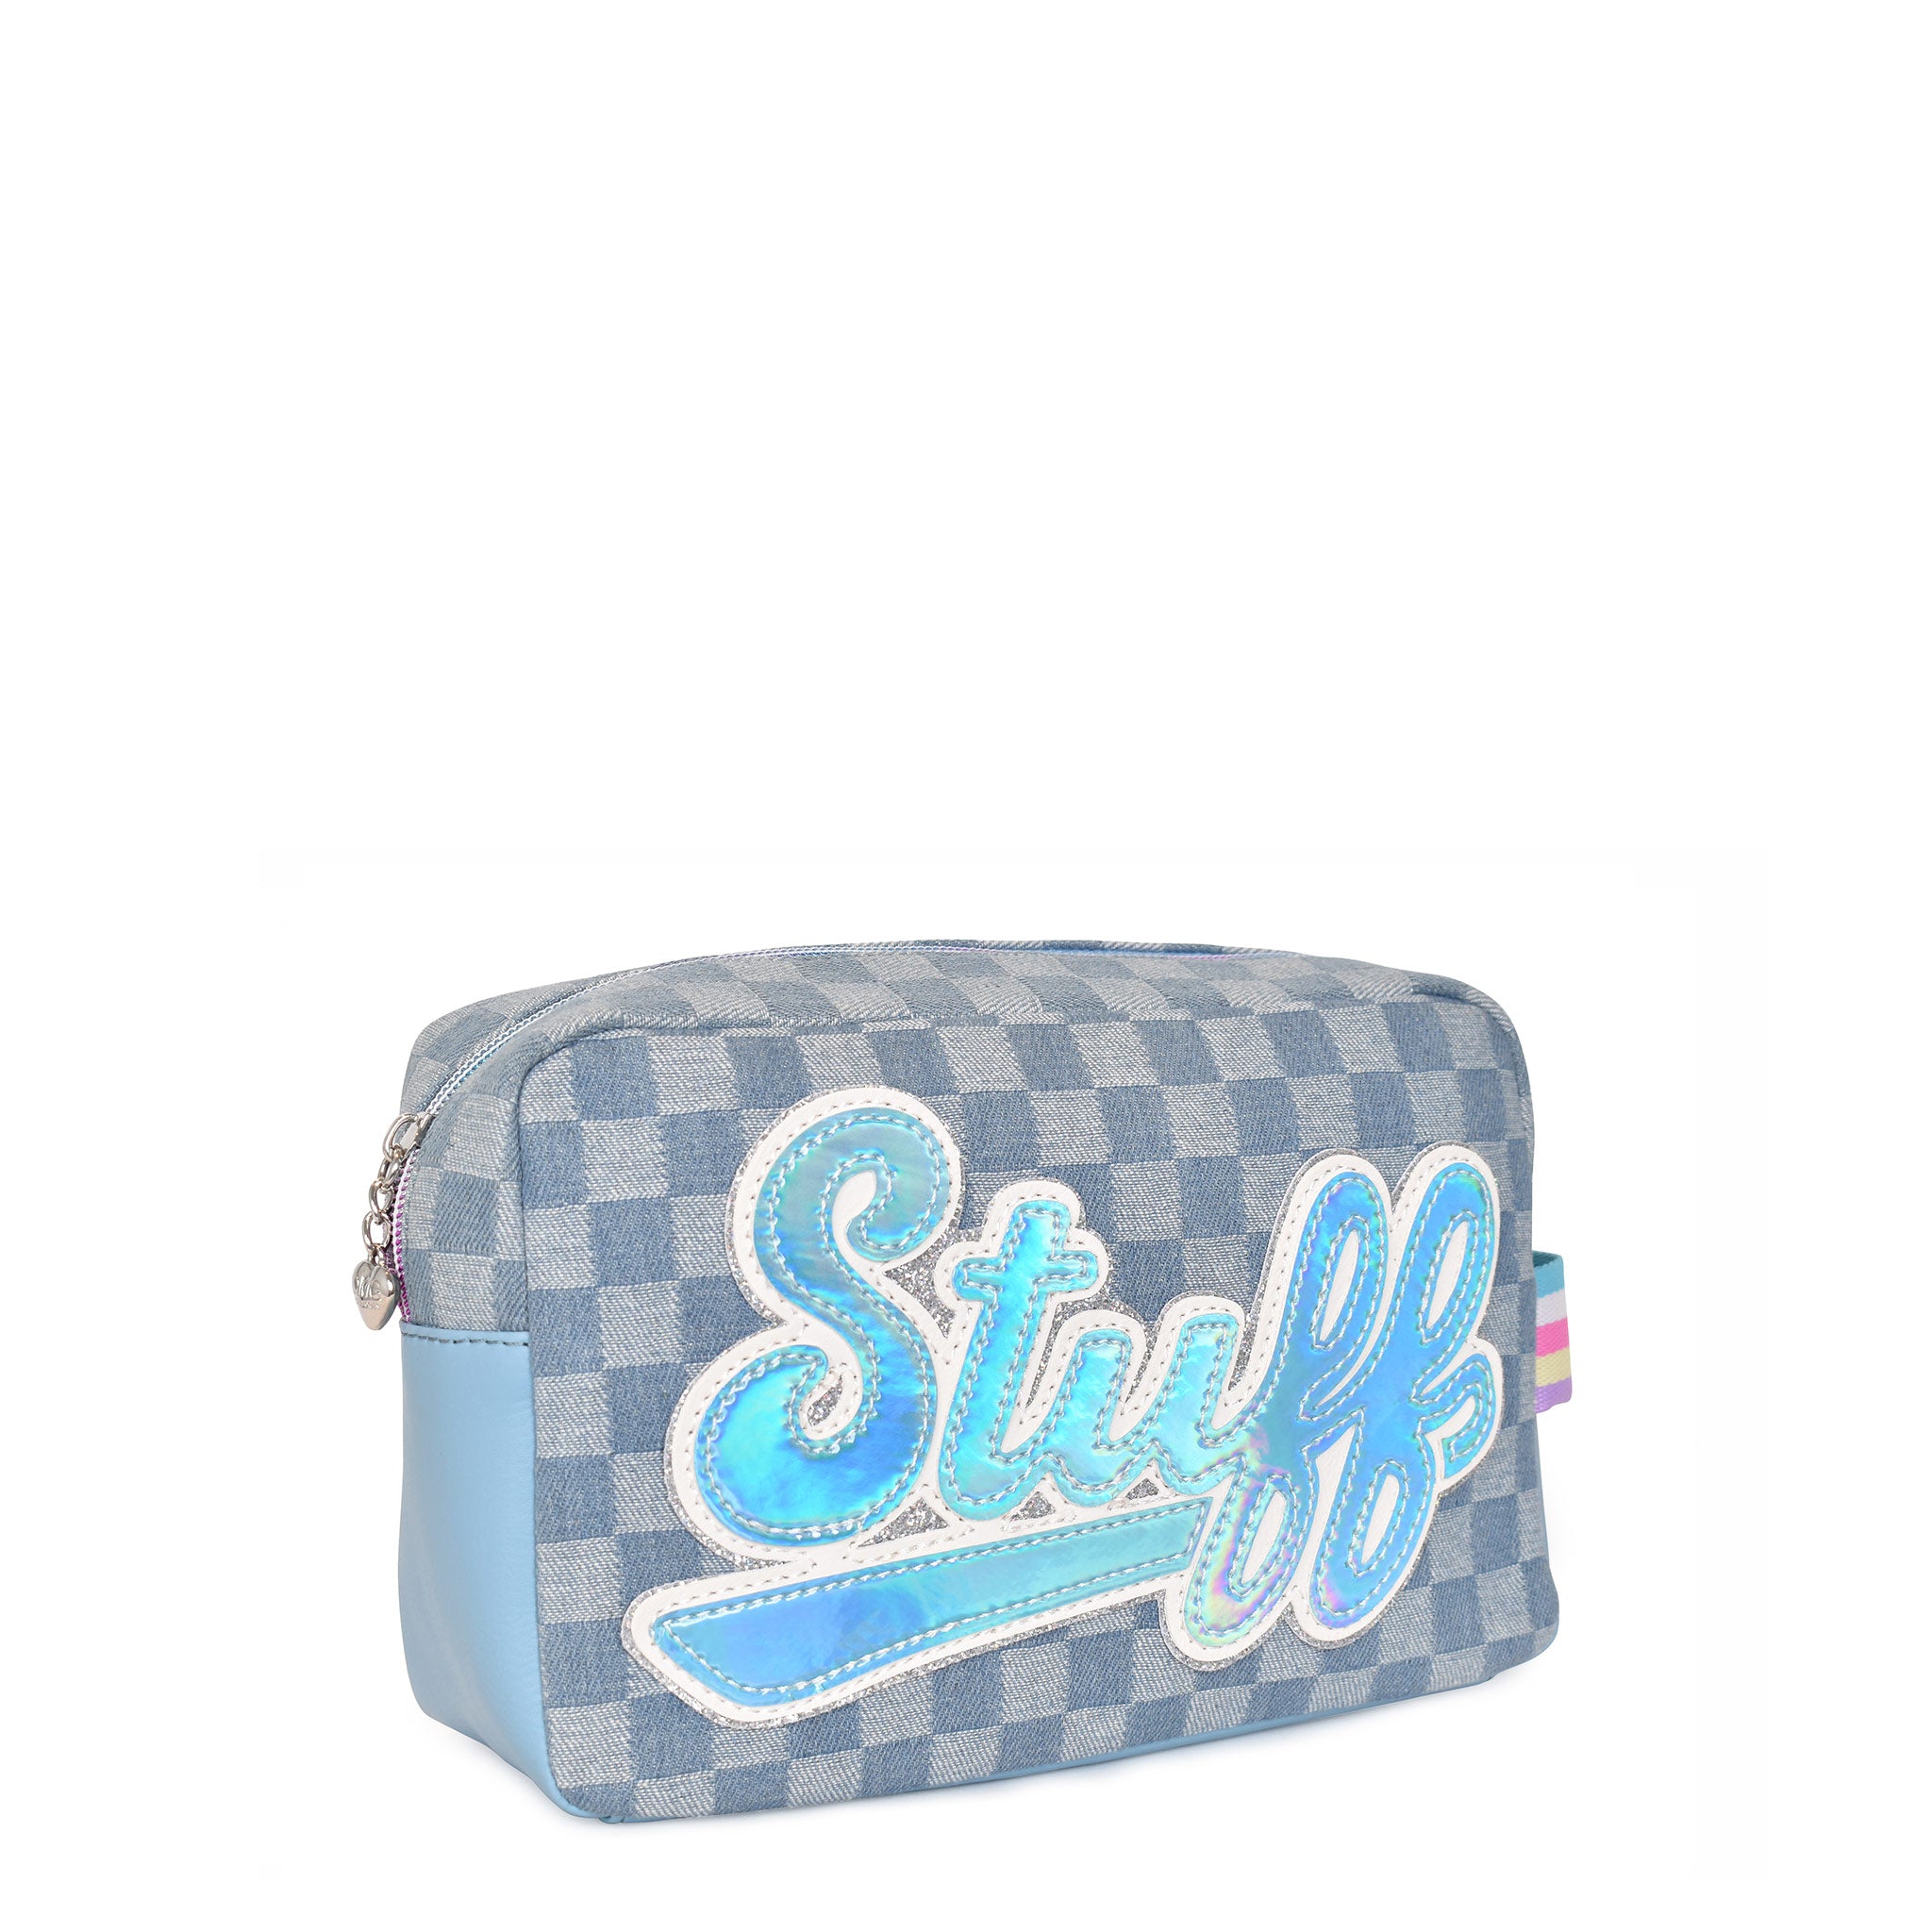 Side view of a denim checkerboard printed pouch with script varsity letters 'STUFF' appliqué